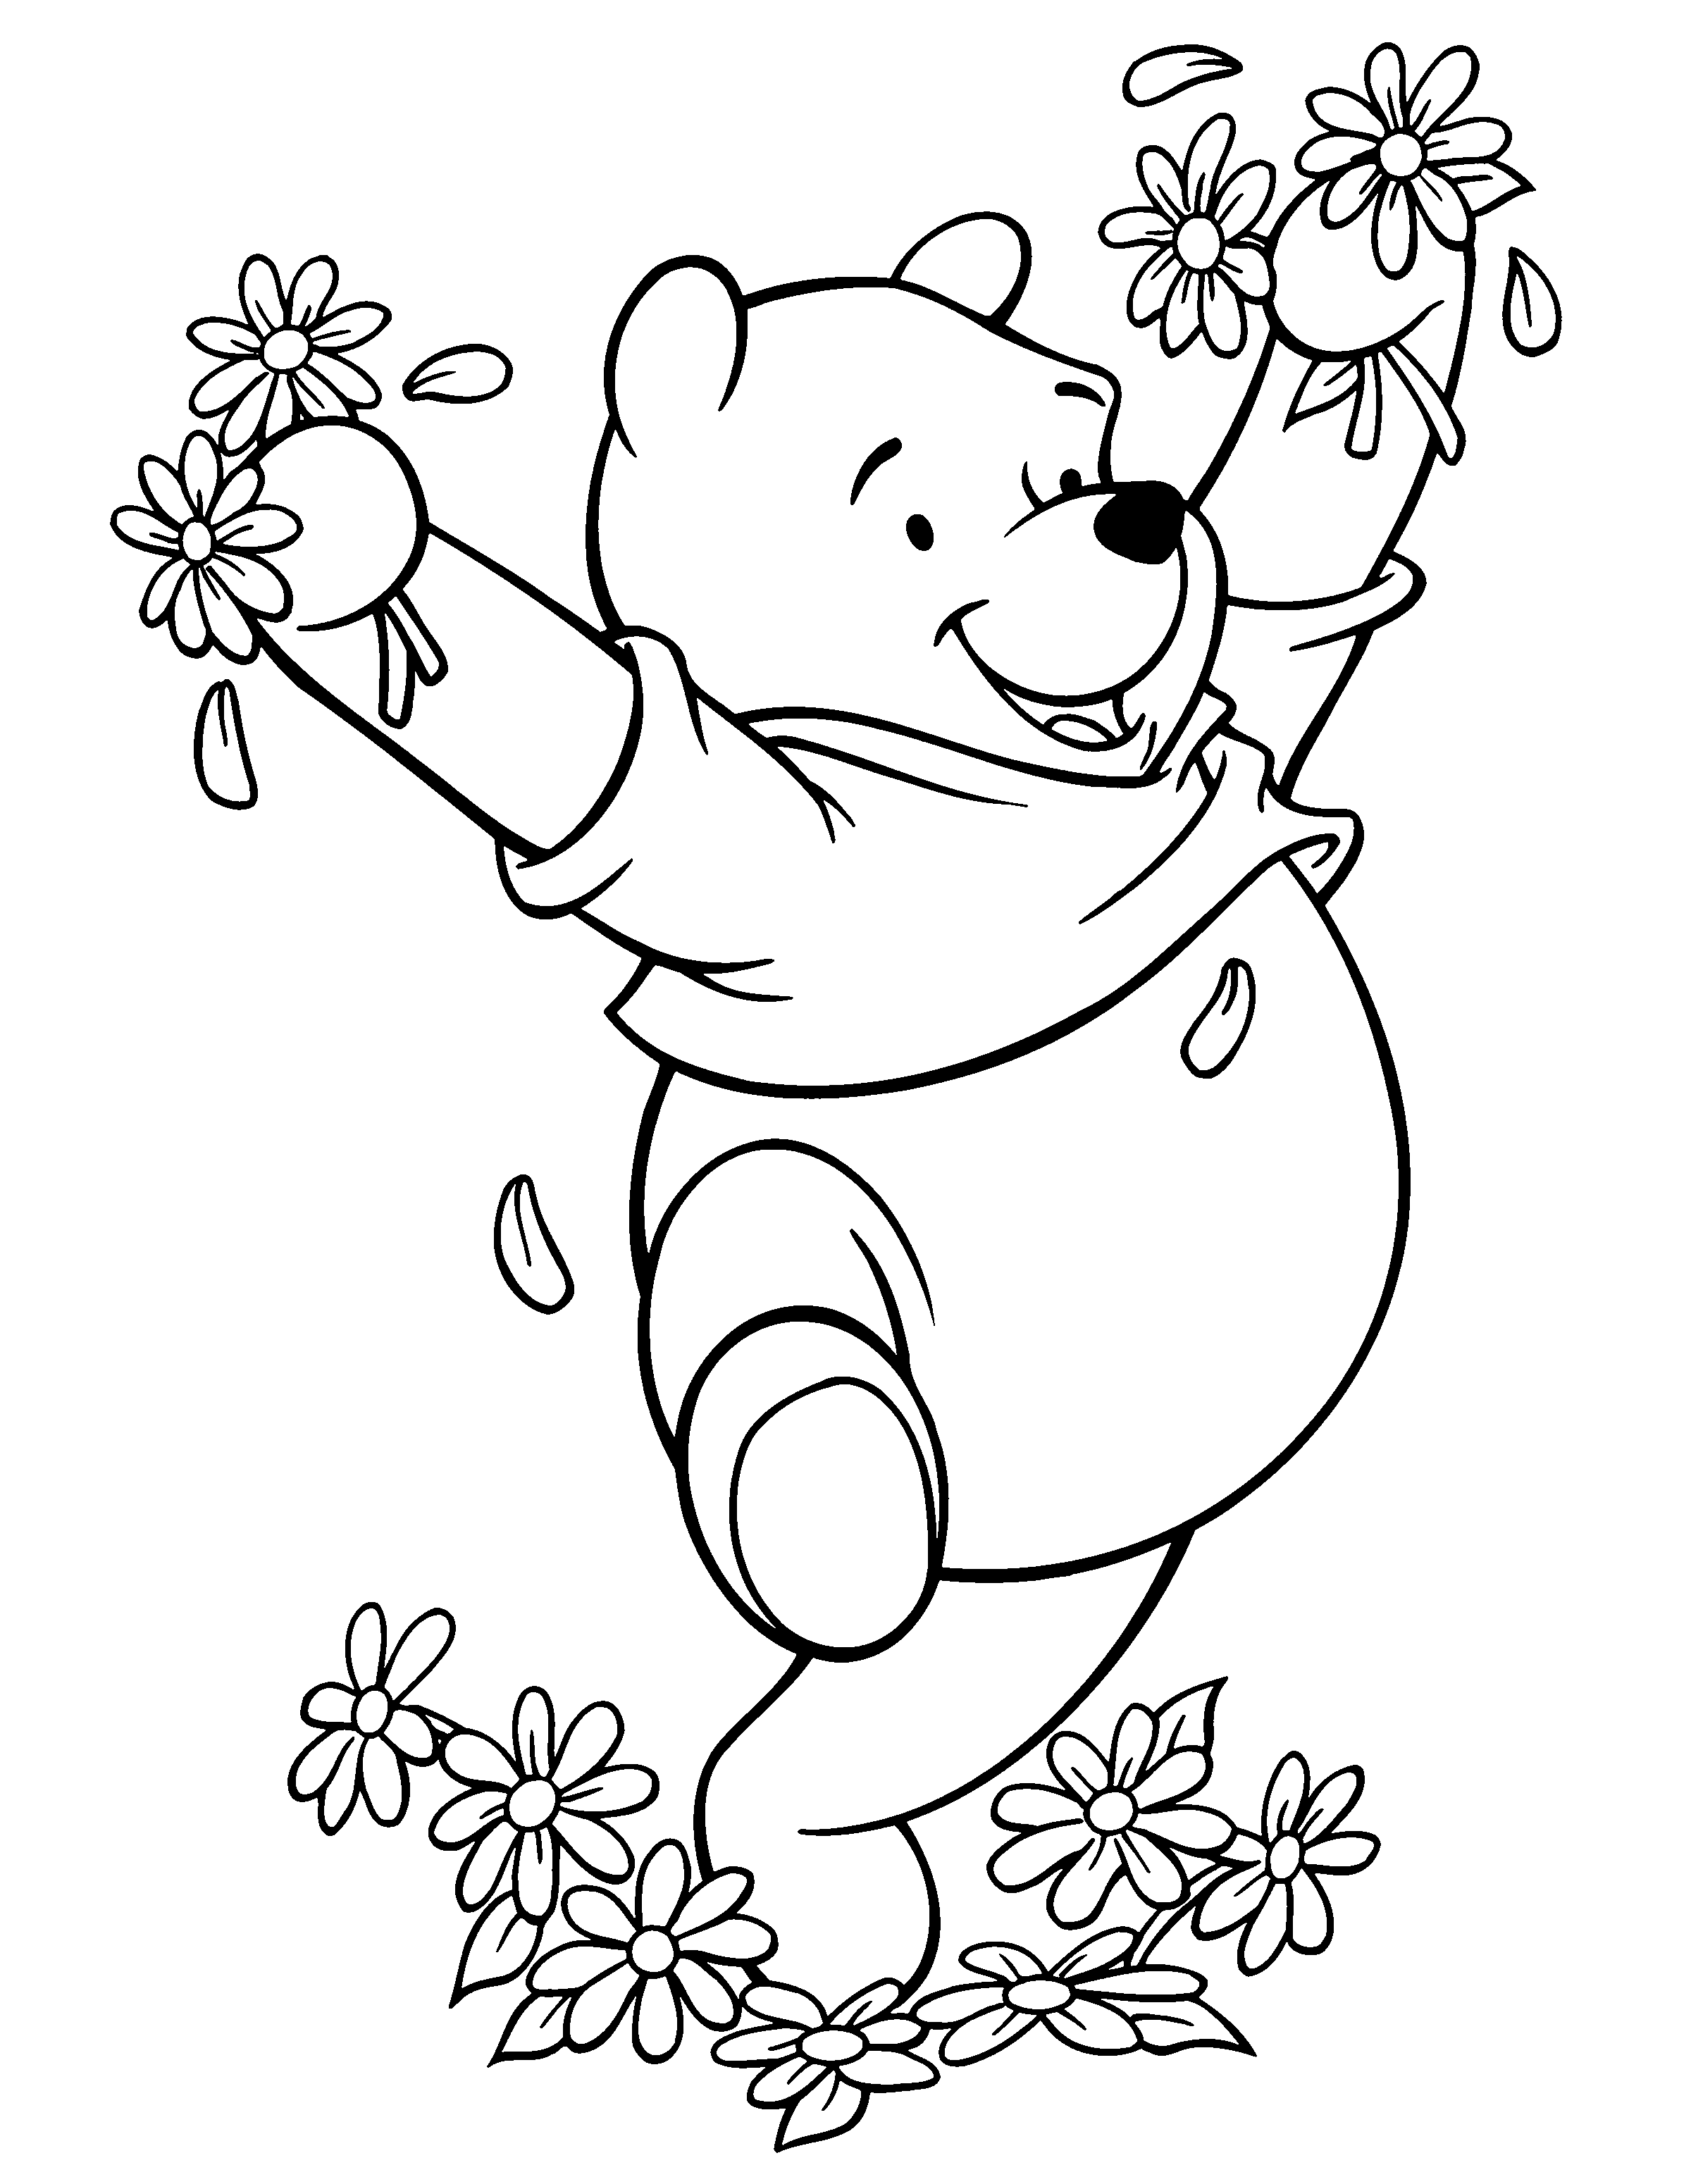 Winnie The Pooh Coloring Pages Coloringpages1001 Com Disney Coloring Pages Mandala Co